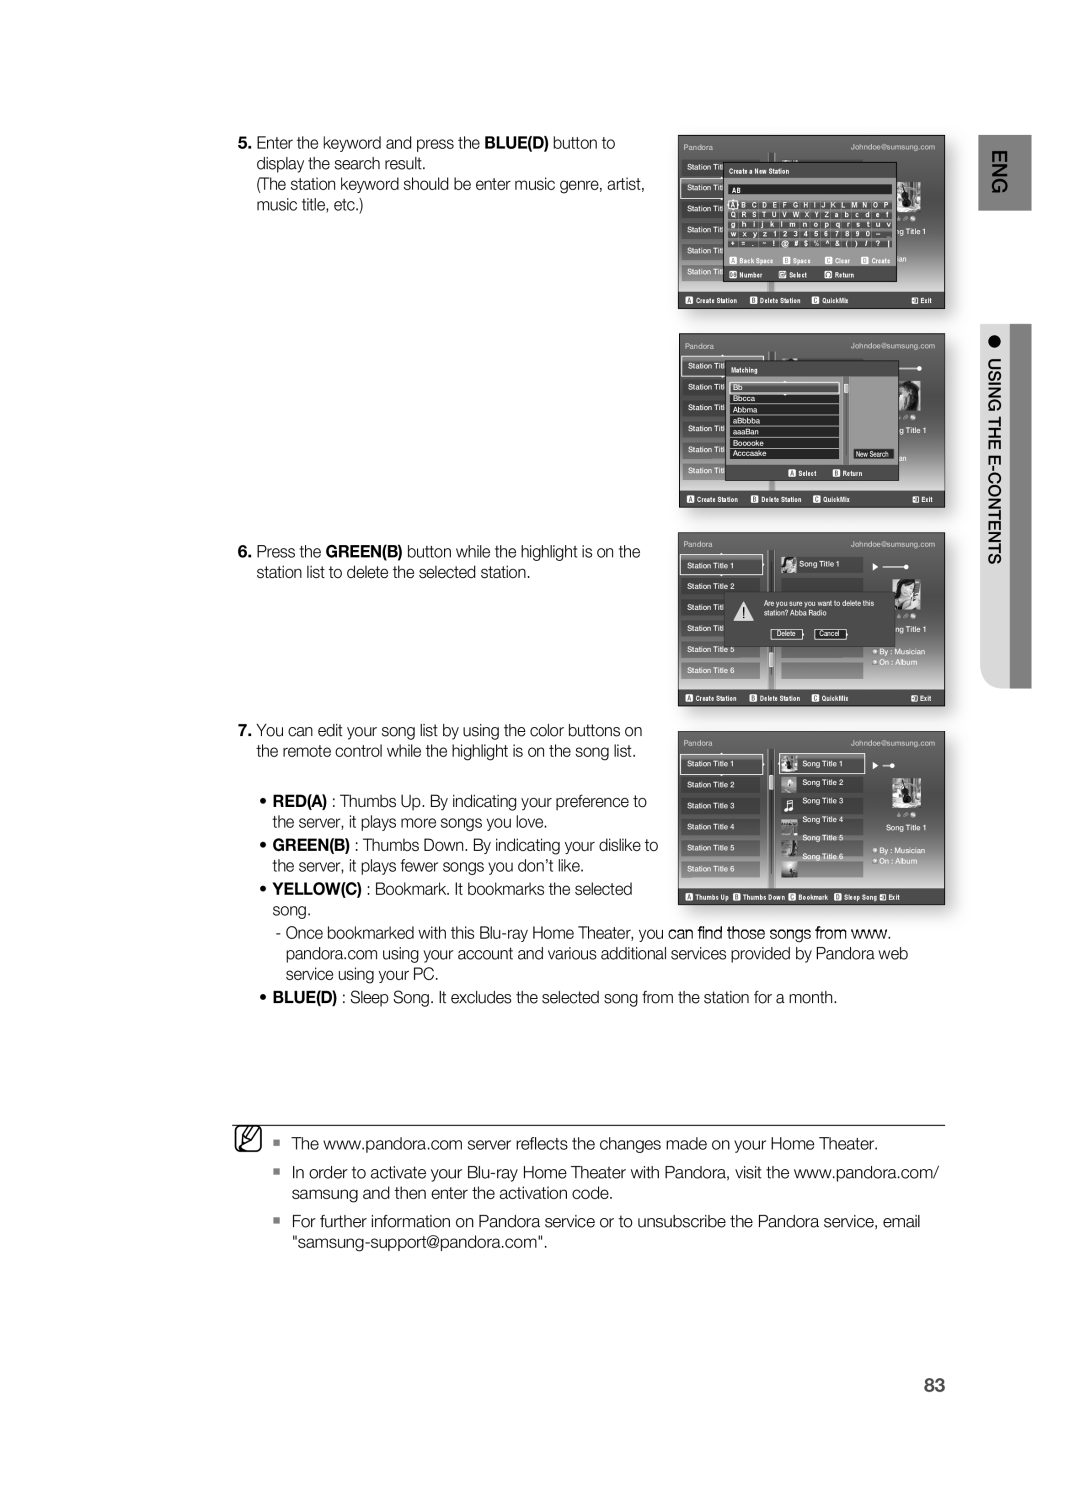 Samsung HT-BD8200 user manual the server, it plays more songs you love 